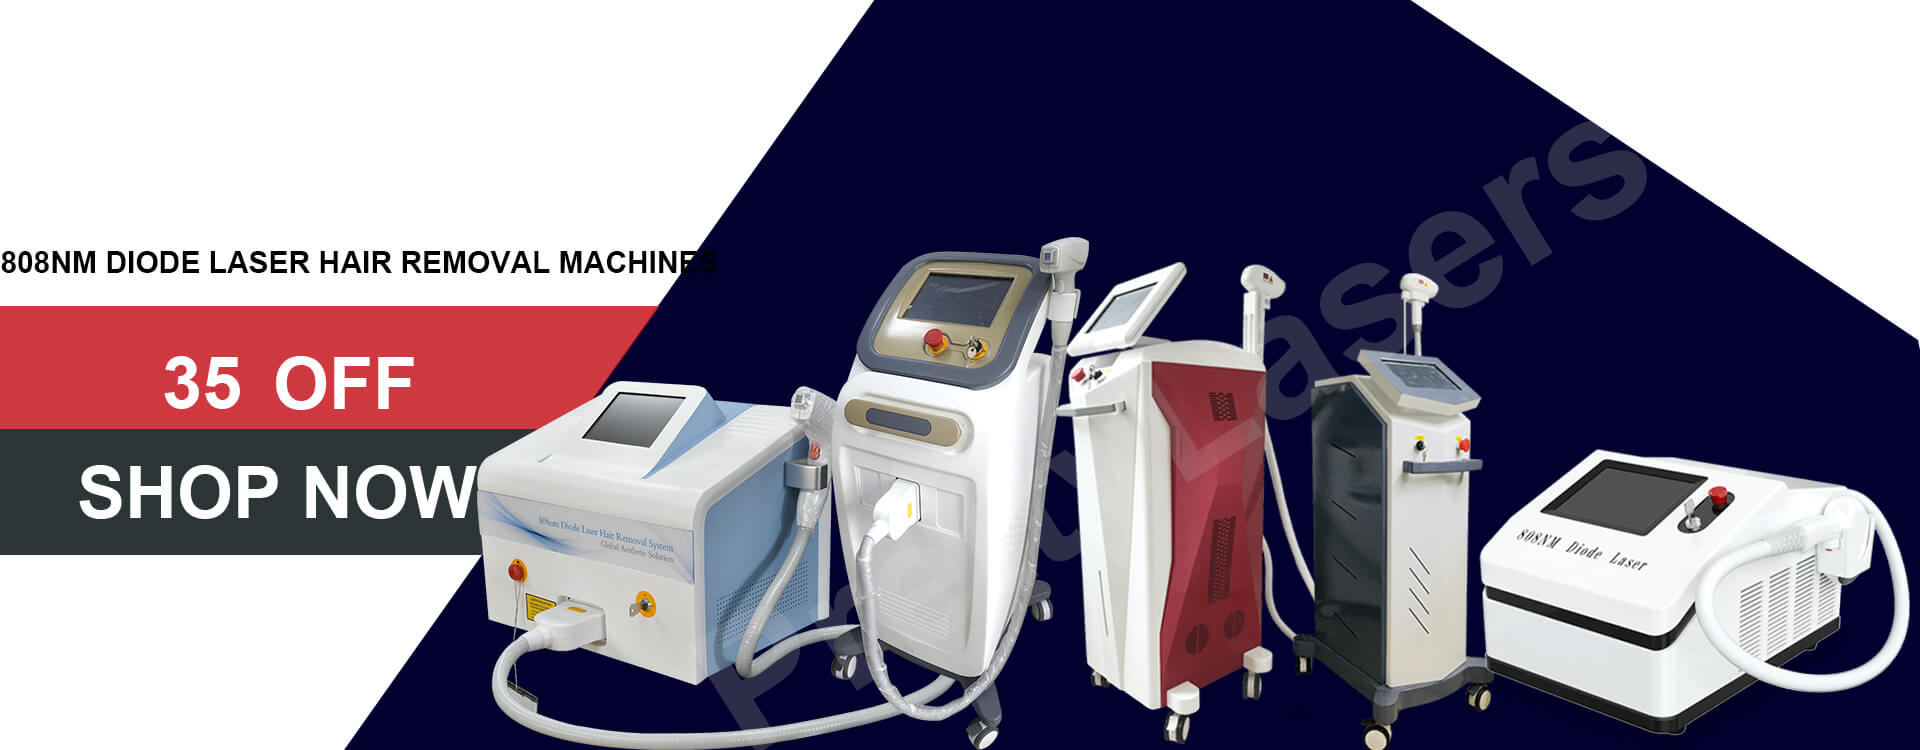 How To Buy Laser Hair Removal Machine?